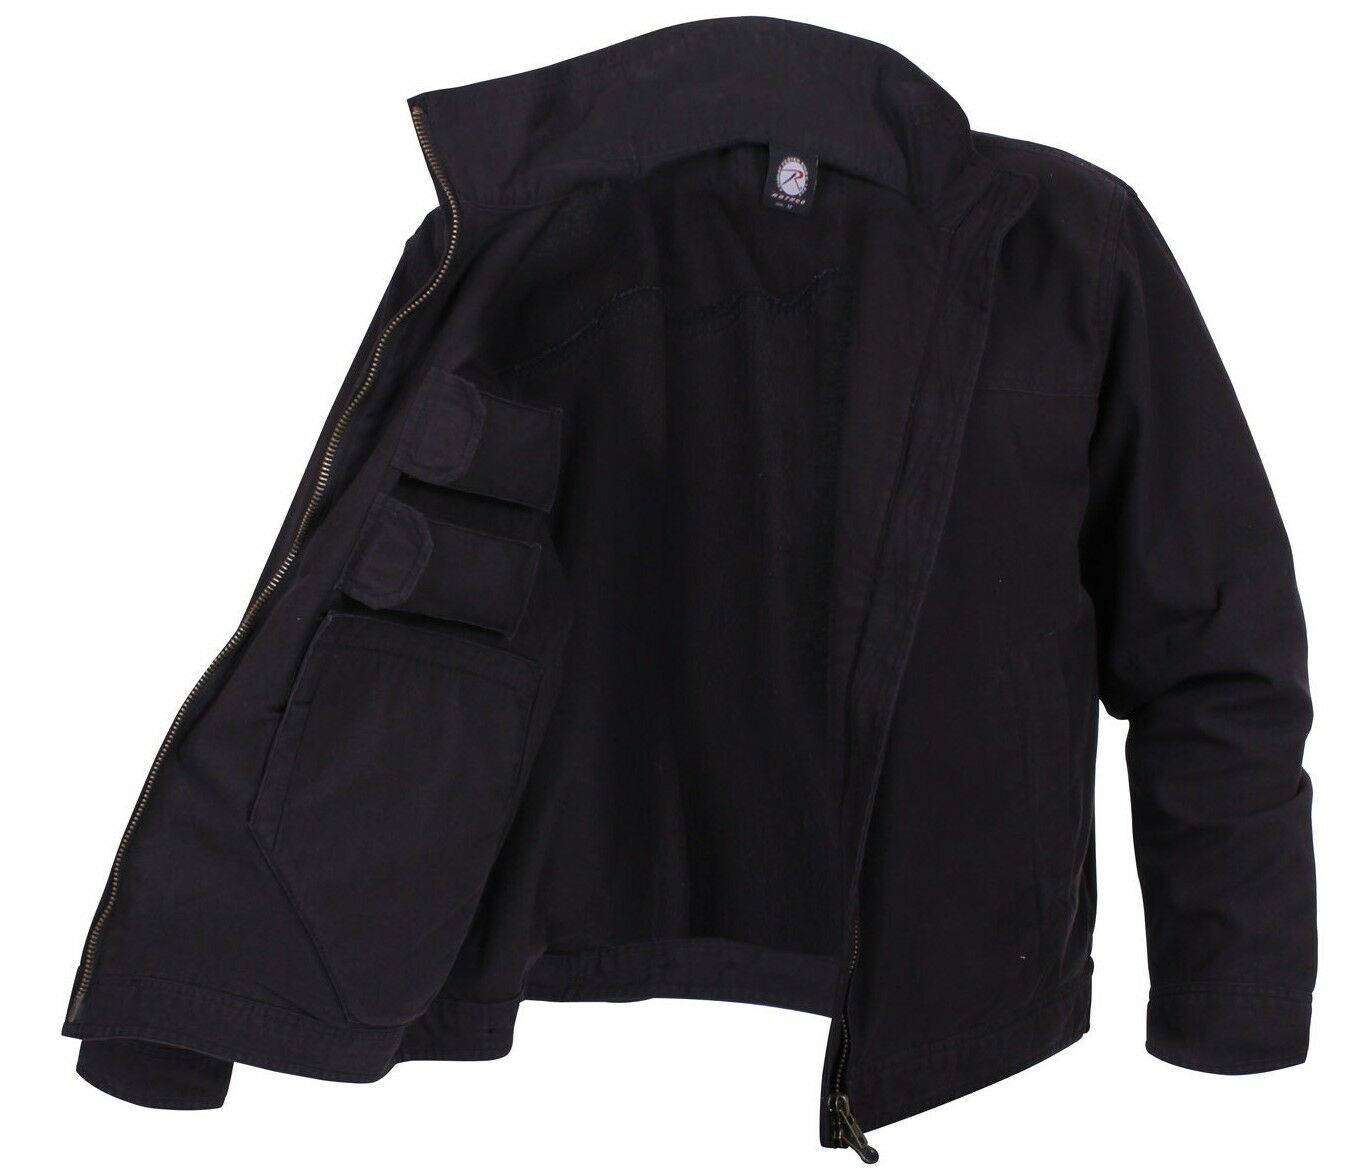 Rothco Lightweight Concealed Carry Jacket